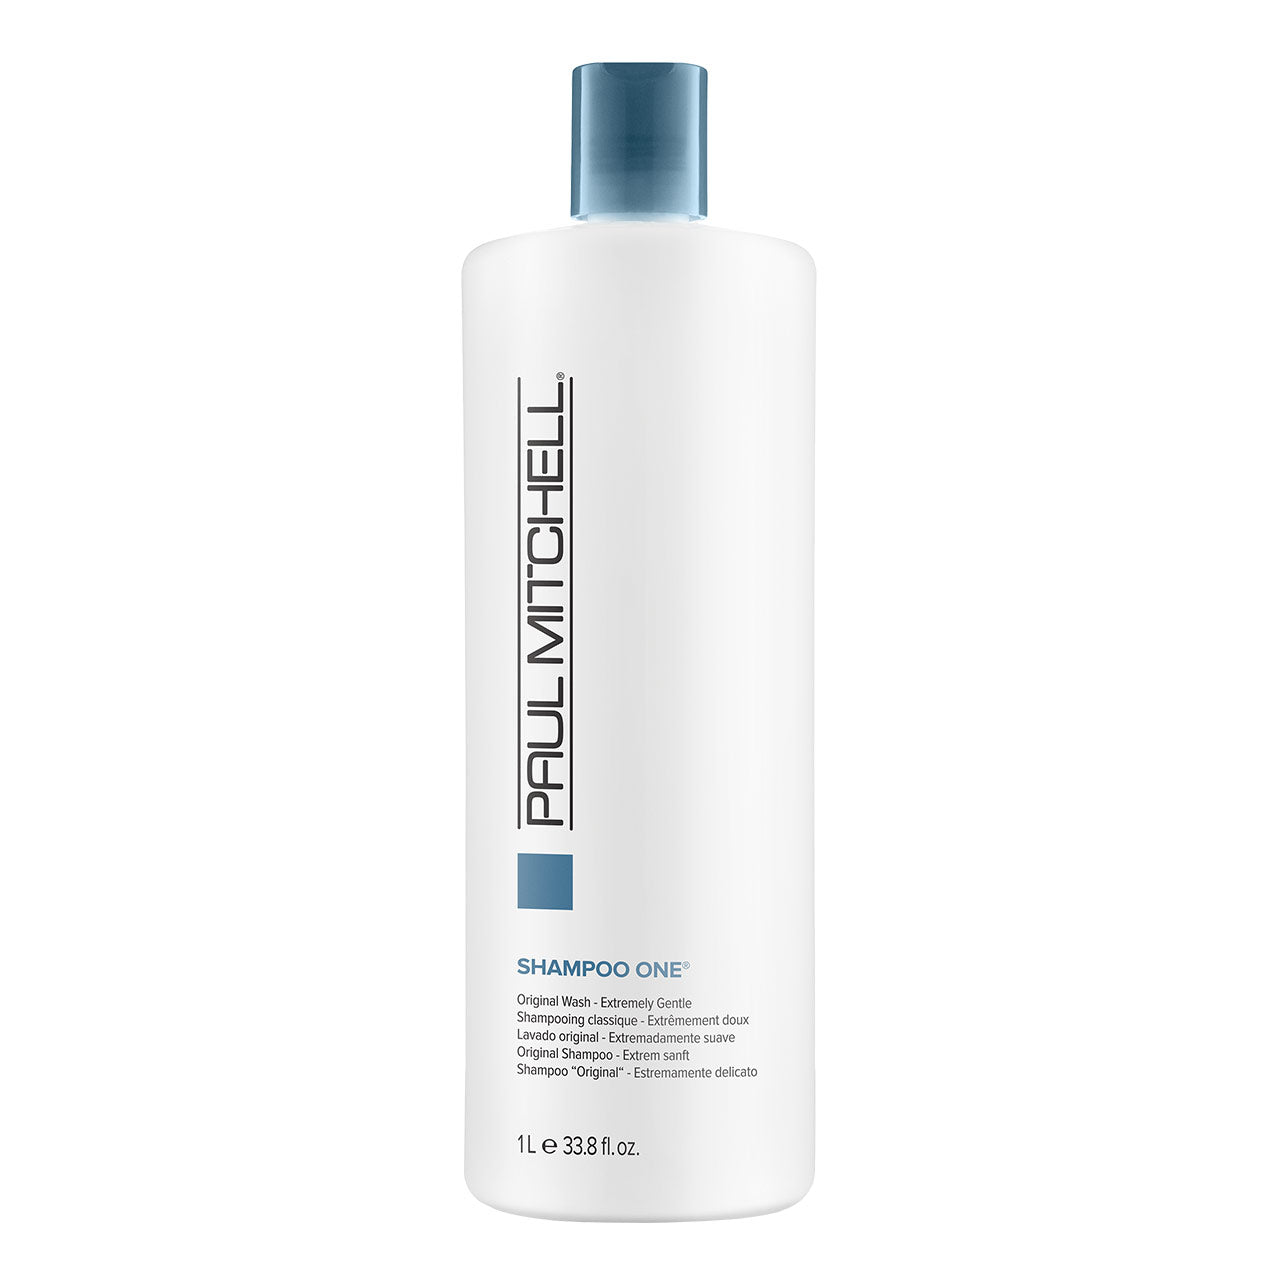 Original Shampoo One - 1L - by Paul Mitchell |ProCare Outlet|